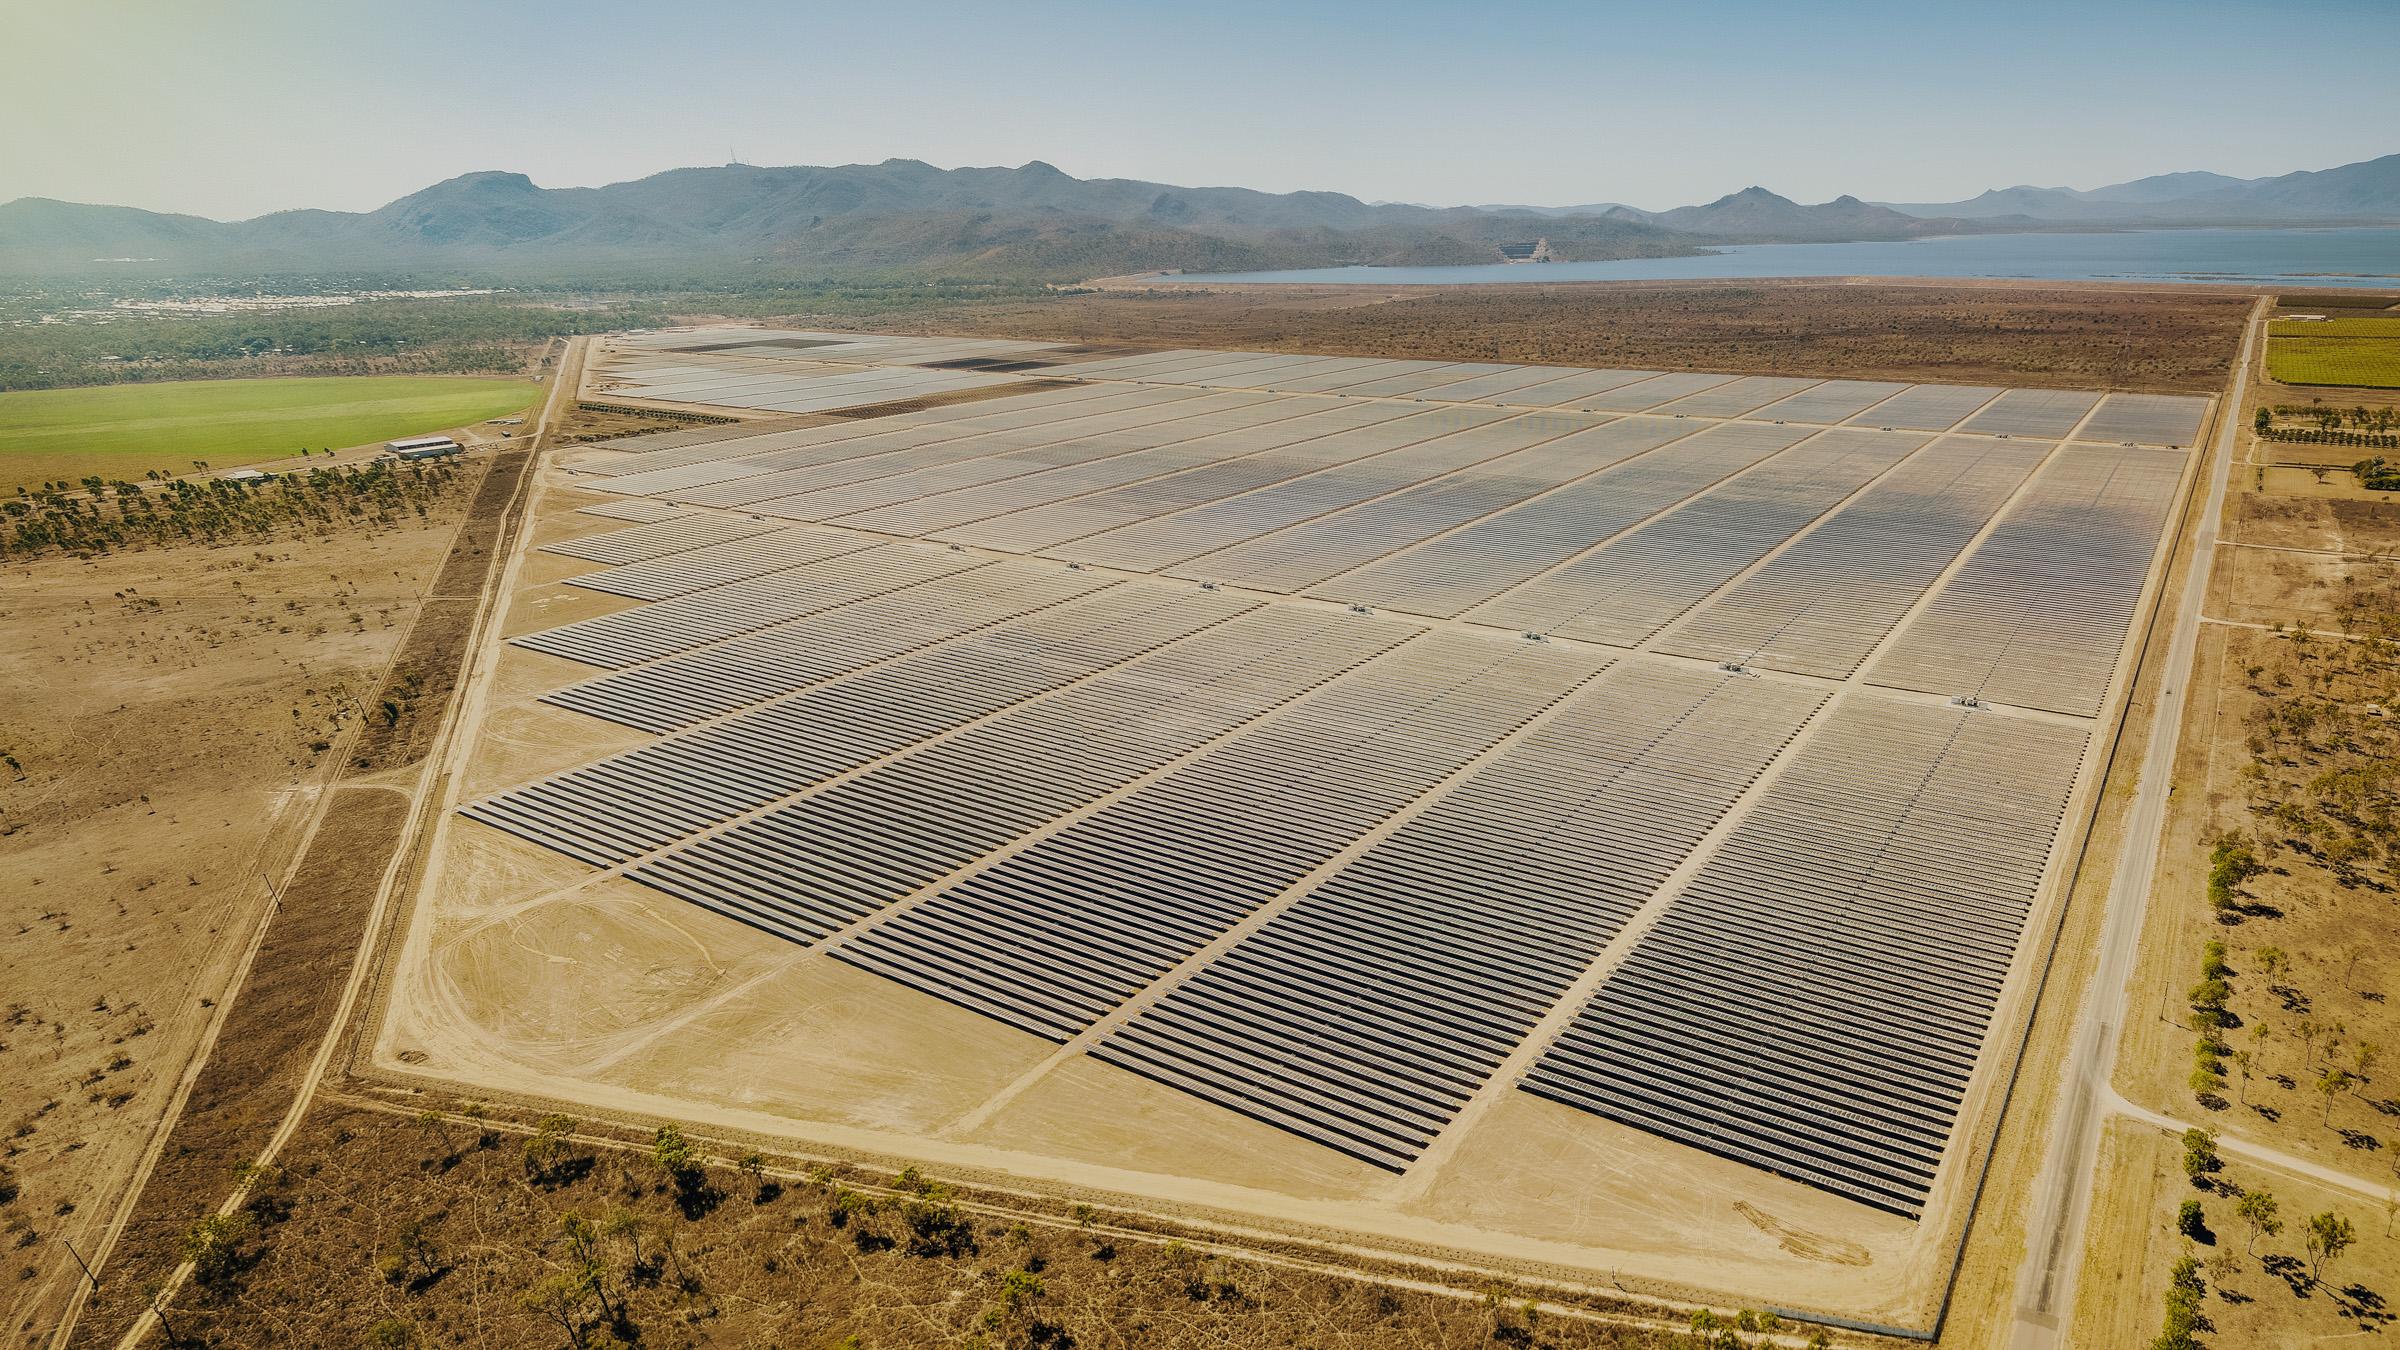 Aerial view of solar energy farm in Townsville, Queensland